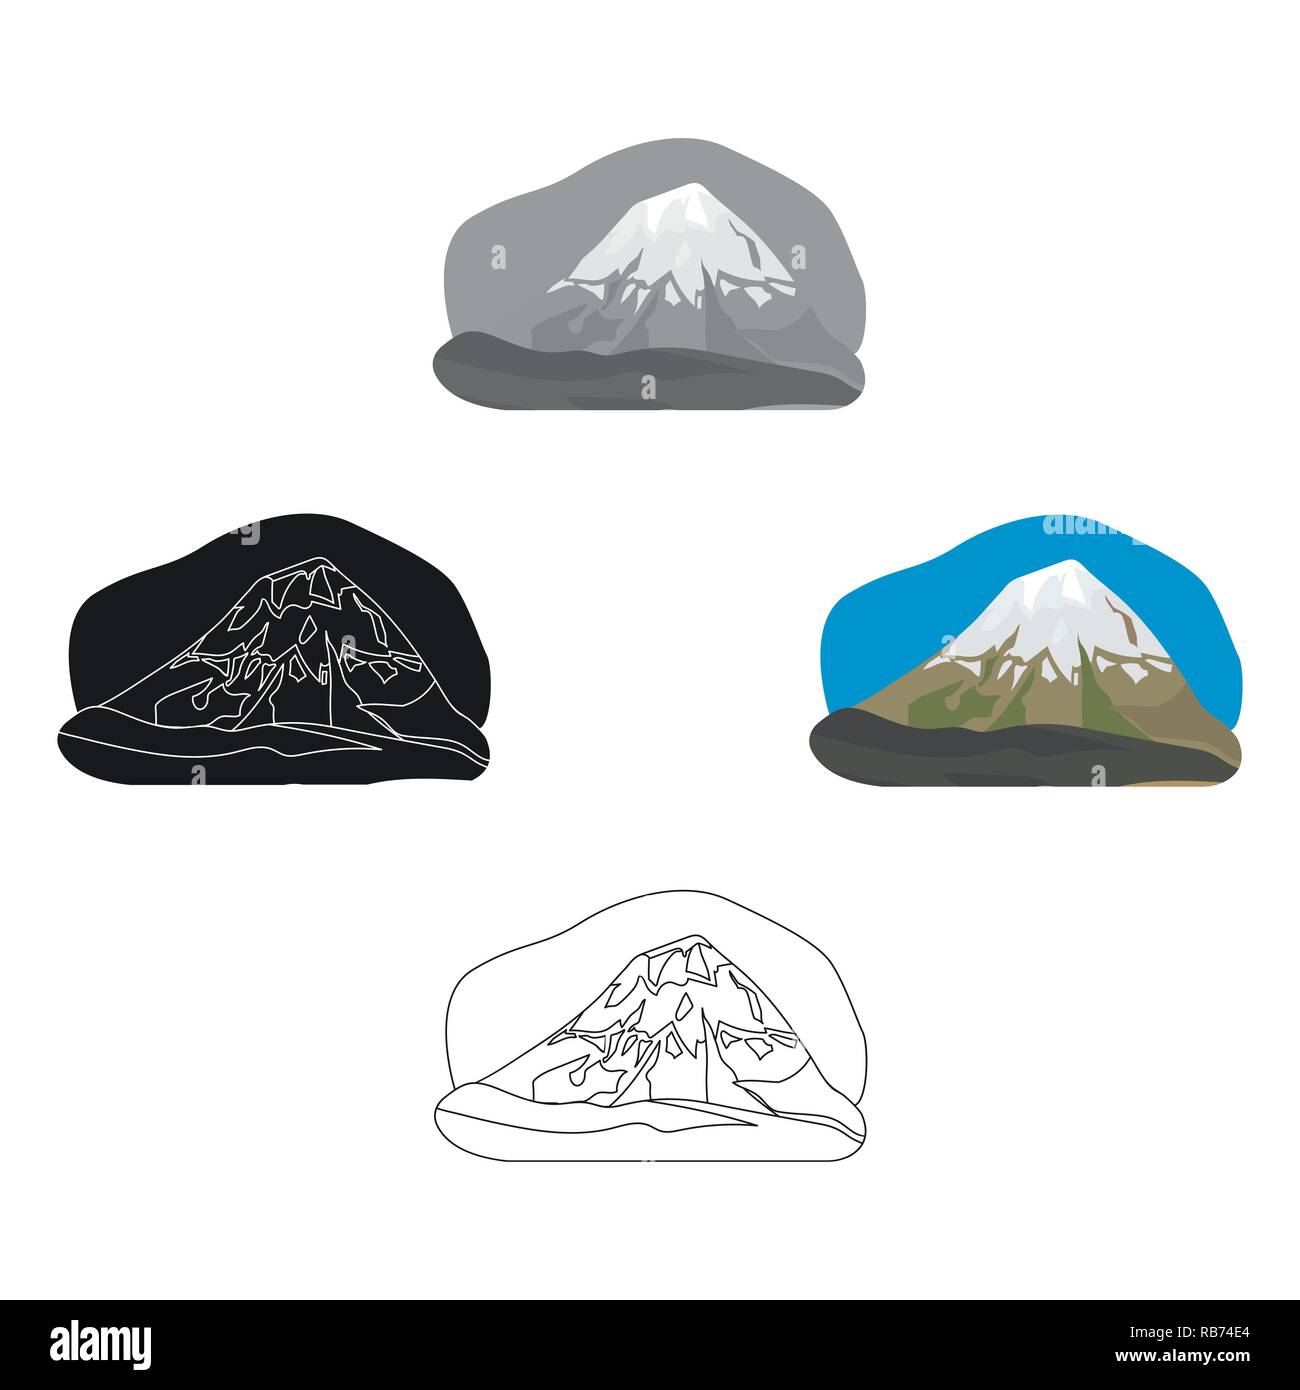 achievement,adventure,america,art,bouldering,cartoon,central,climbing,country,design,geometry,hiking,icon,illustration,ink,insignia,isolated,letterpress,logo,mexican,mexico,mountain,mountaineering,north,outdoor,popocatepetl,print,range,rock,round,stamp,states,summit,symbol,travel,trekking,united,vector,web Vector Vectors , Stock Vector